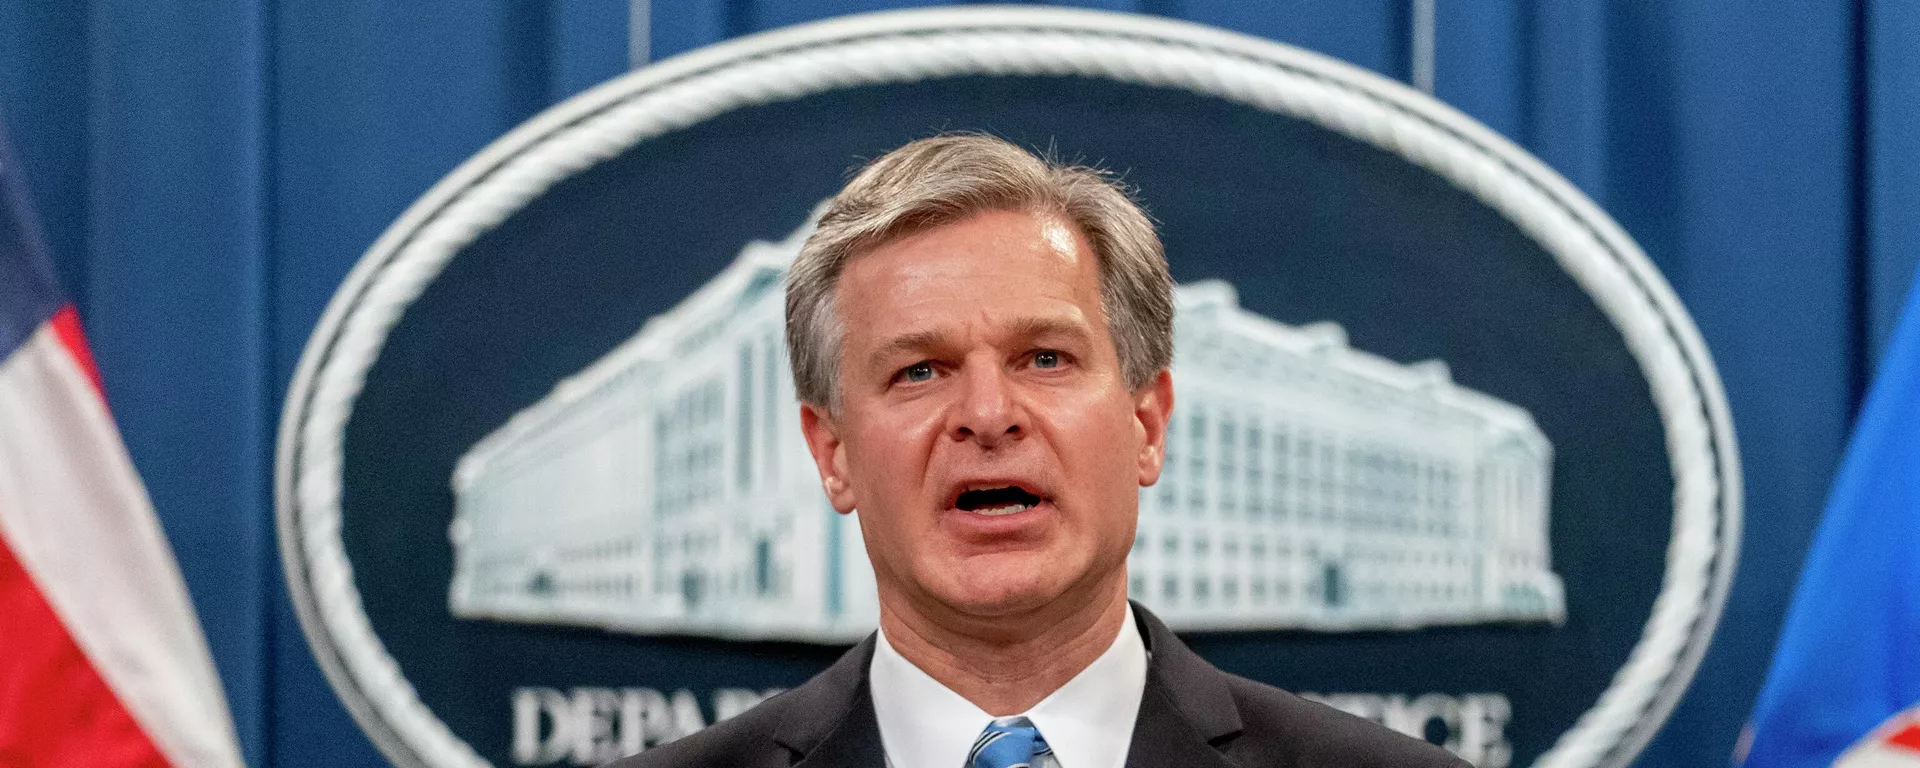 FBI Director Christopher Wray speaks at a news conference at the Justice Department in Washington, on Nov. 8, 2021. Wray says the threat to the West from the Chinese government is more brazen and damaging than ever before. In a speech on Jan. 31, 2022, at the Reagan Presidential Library in California, Wray accused Beijing of stealing American ideas and innovation and launching massive hacking operations.  - Sputnik International, 1920, 31.10.2023